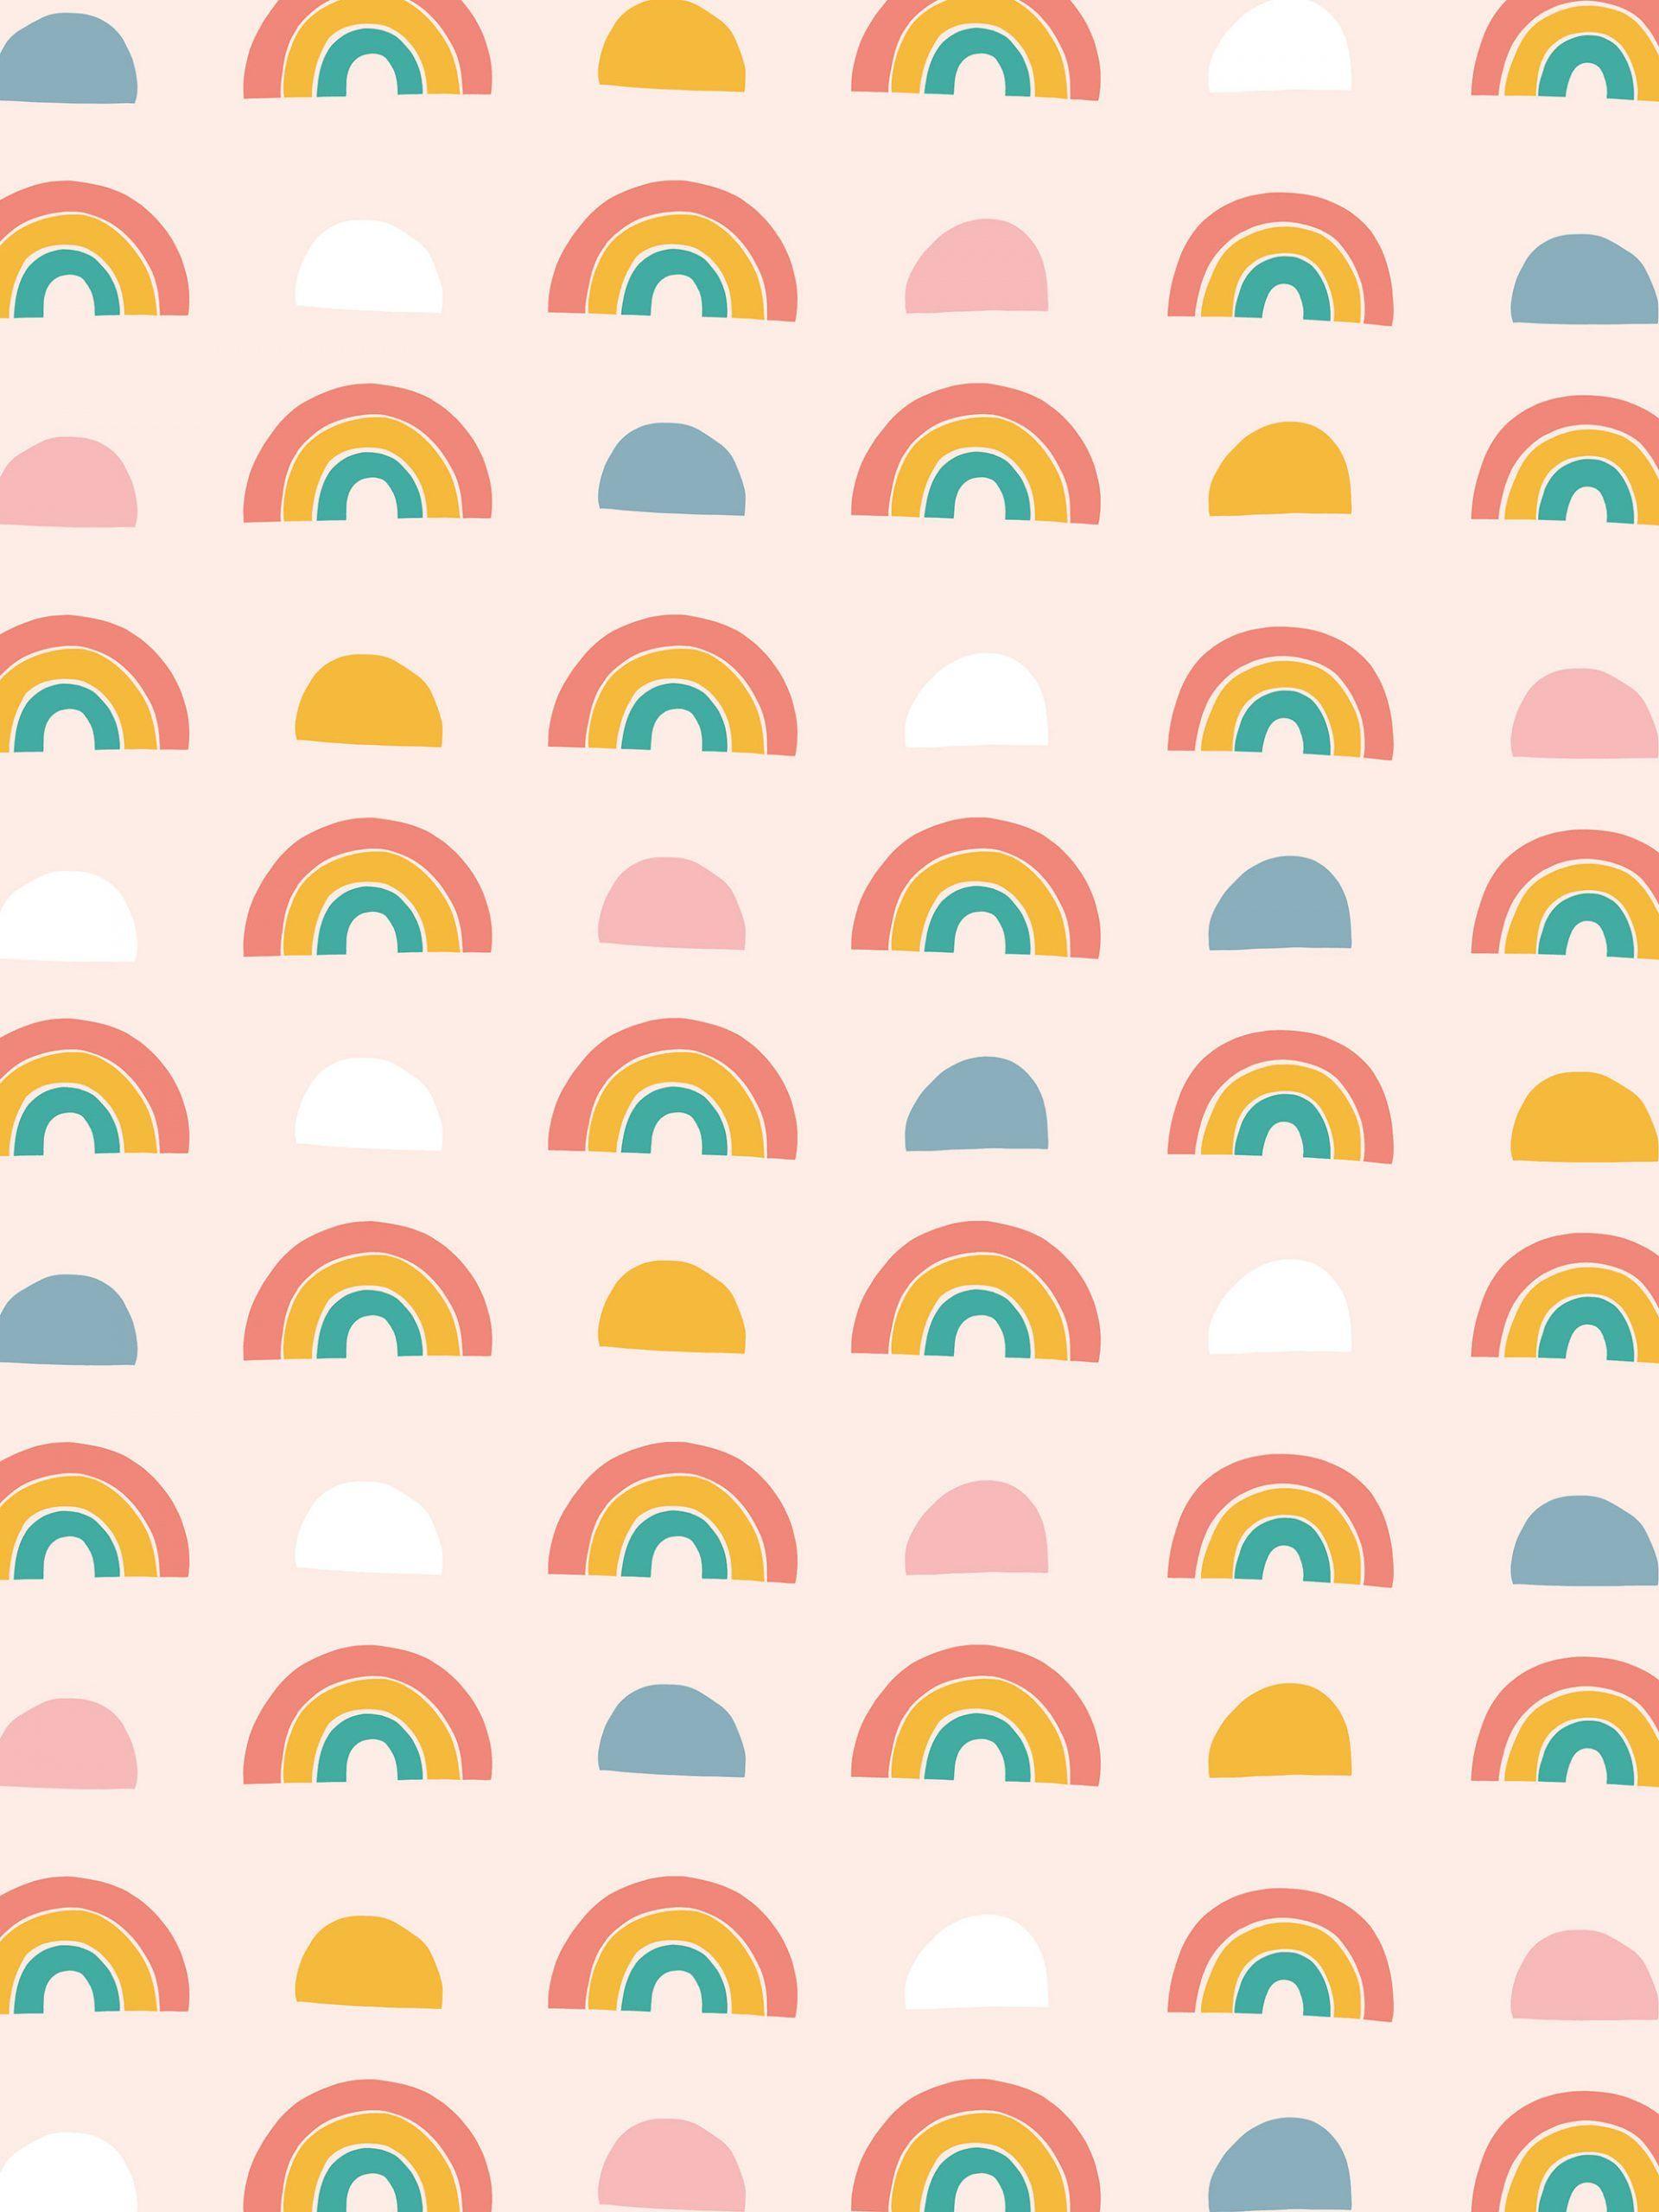 Cute Rainbow Clouds Background Wallpaper Image For Free Download  Pngtree